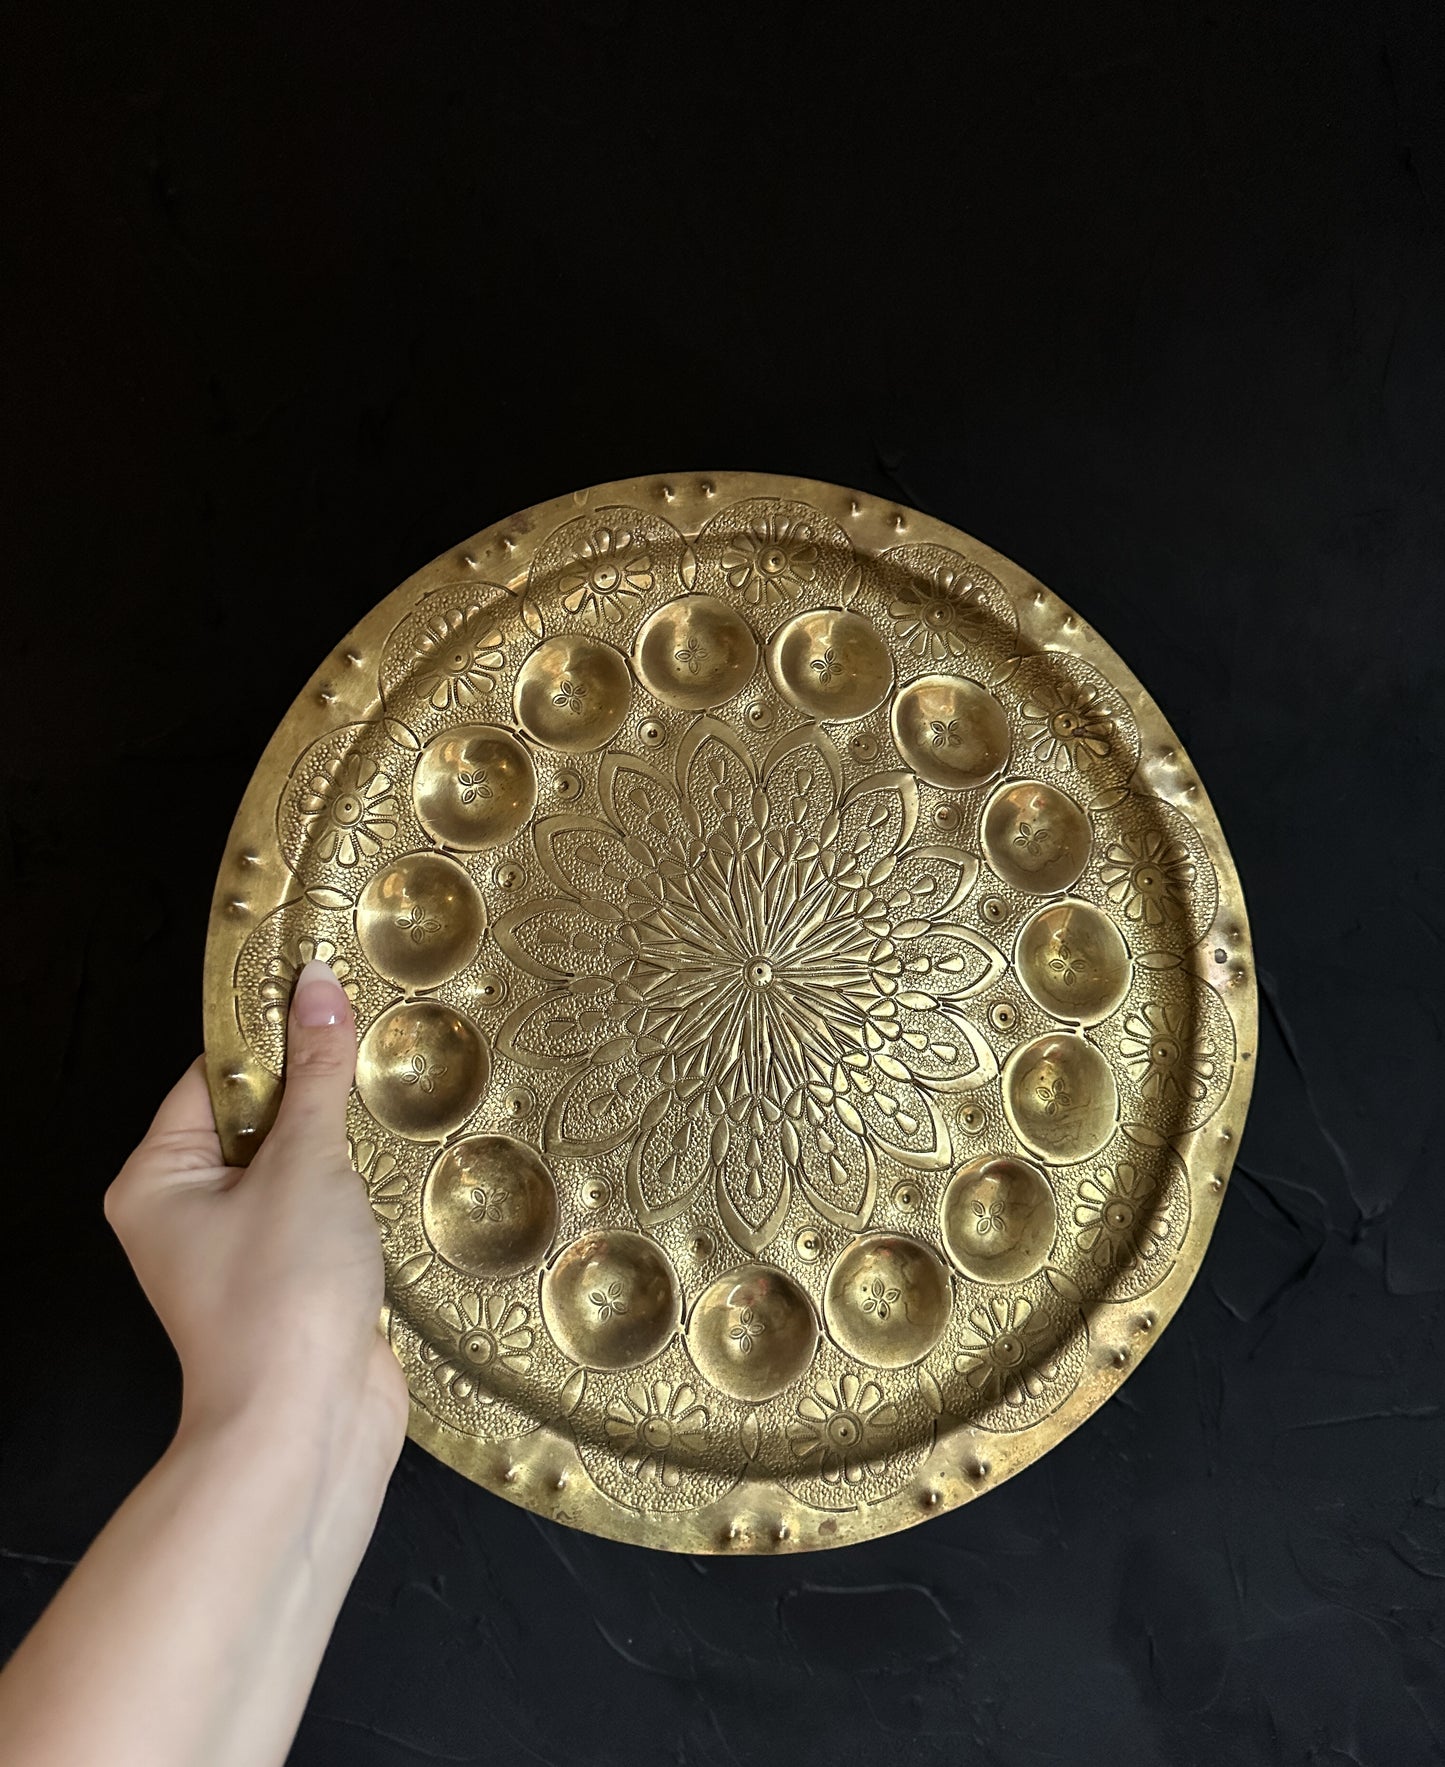 This Gorgeous Large Vintage Brass Dish would be the perfect crystal grid. Especially since it has divots for spheres surrounding the edge.